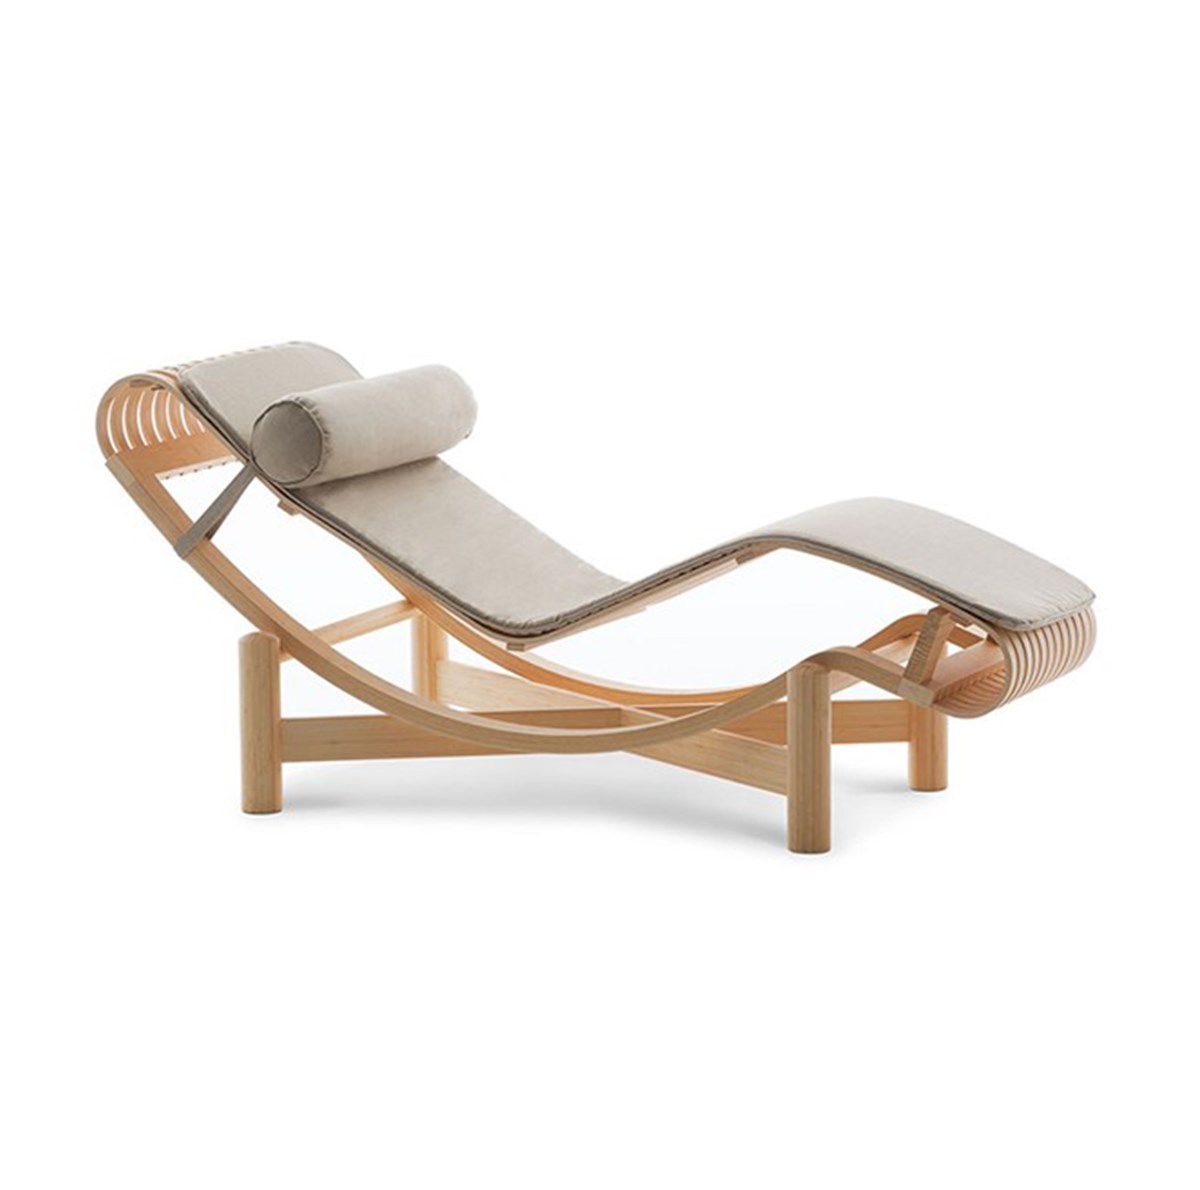 Cassina-Charlotte-Perriand-Tokyo-Chaise-Longue-Outdoor-Matisse-1